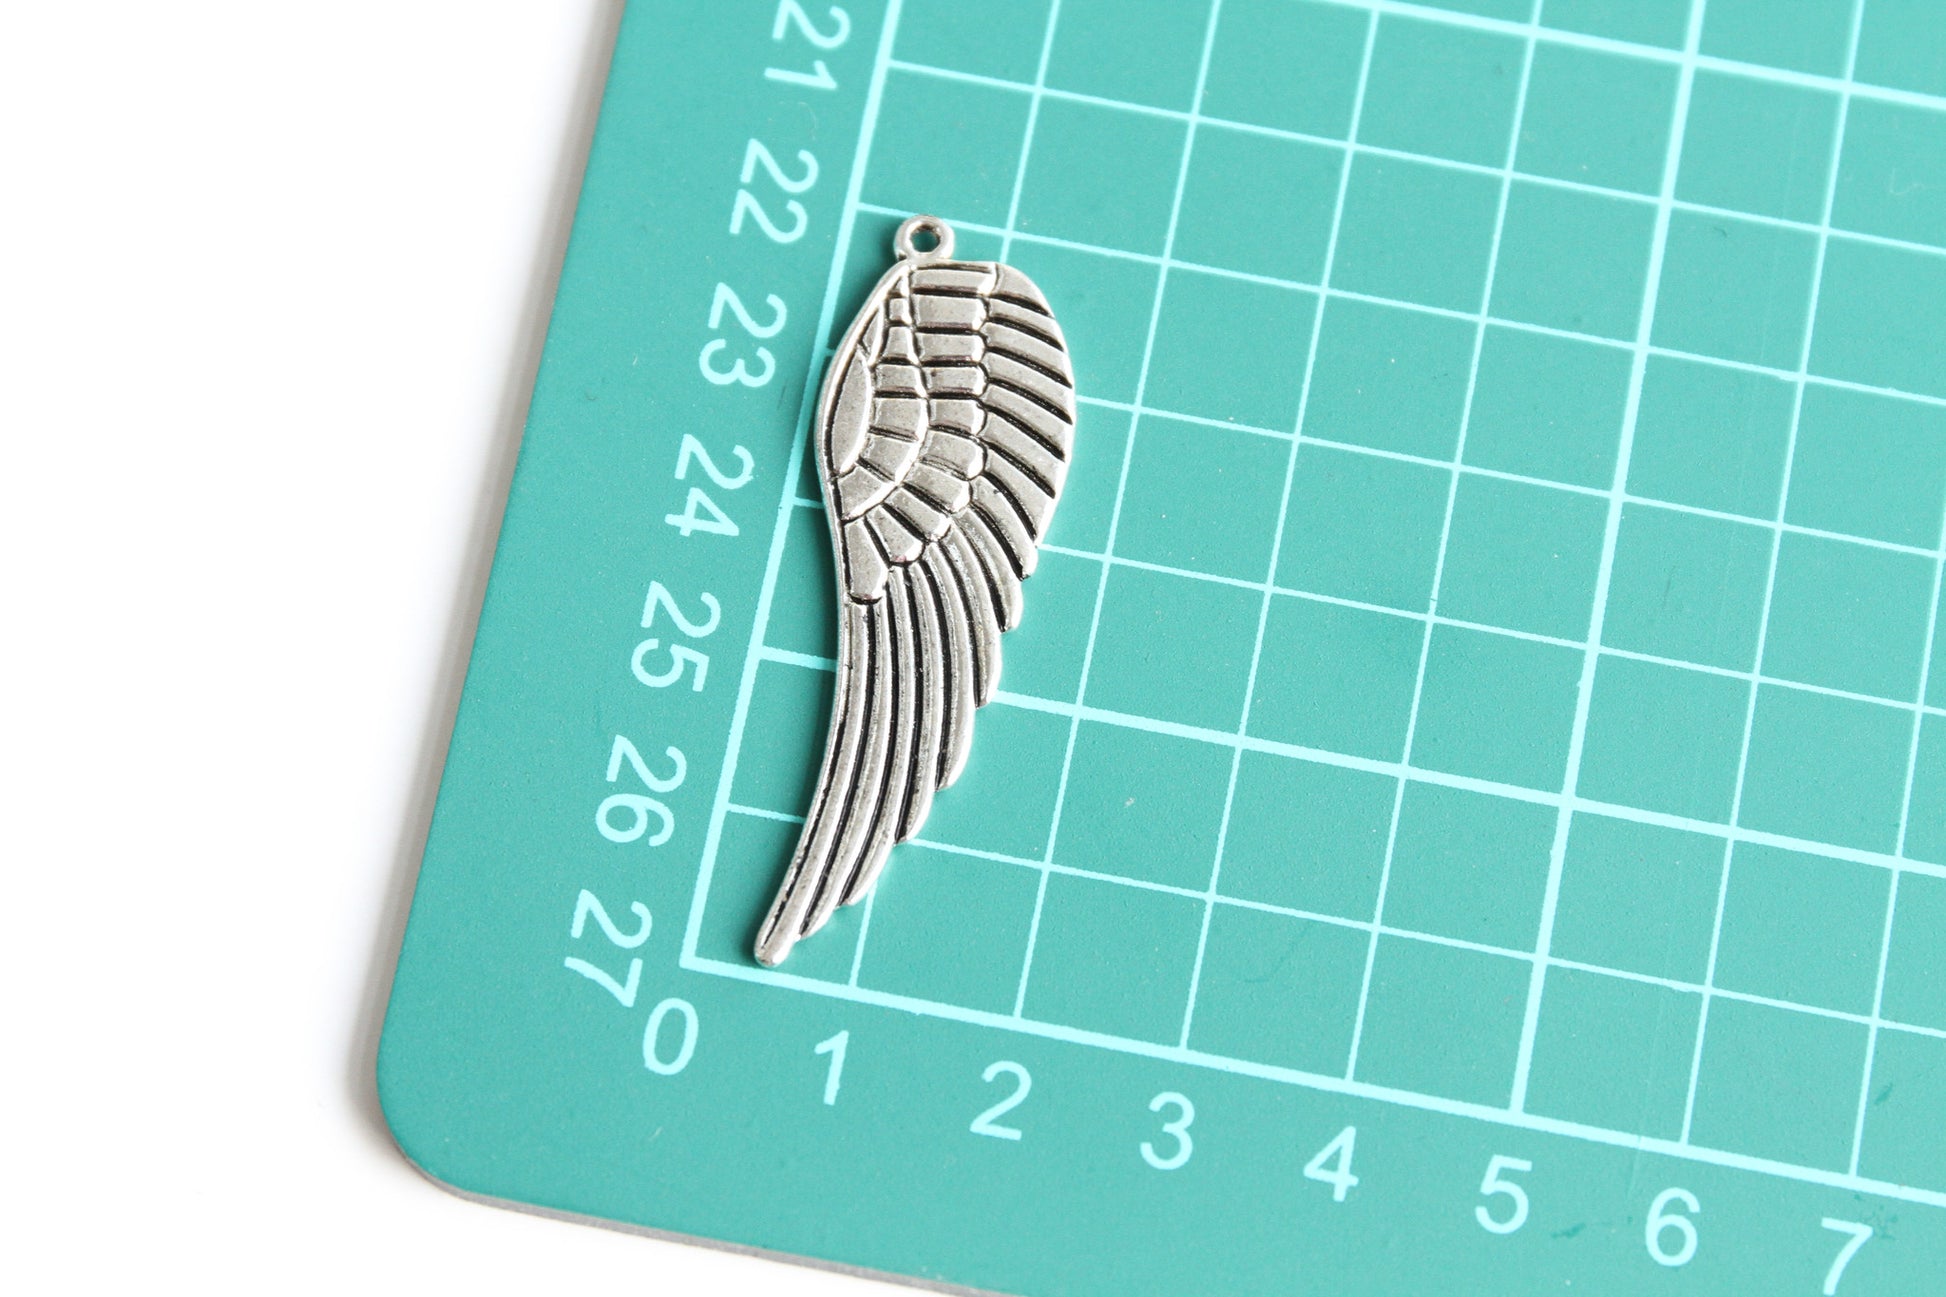 Charm - Feather Wing, Antique Silver - KEY Handmade
 - 1